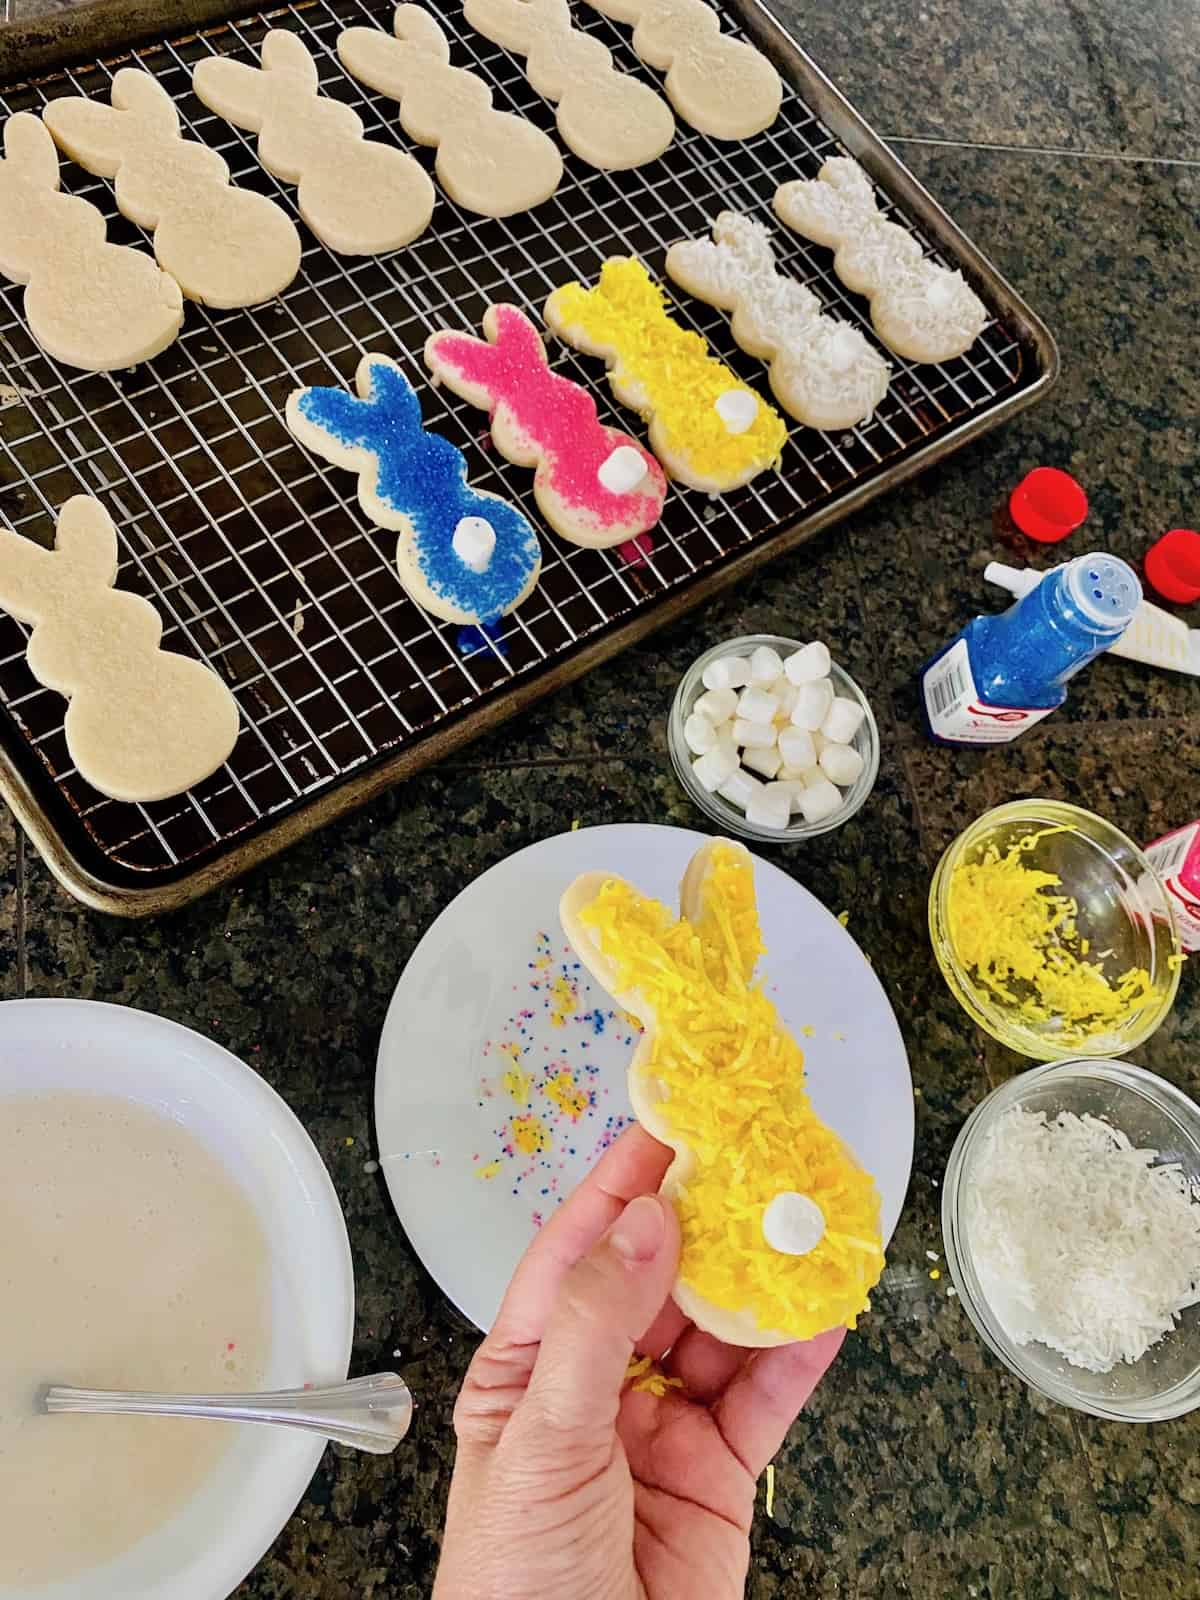 Fully decorated cookie in a hand with decorating ingredients around the counter.